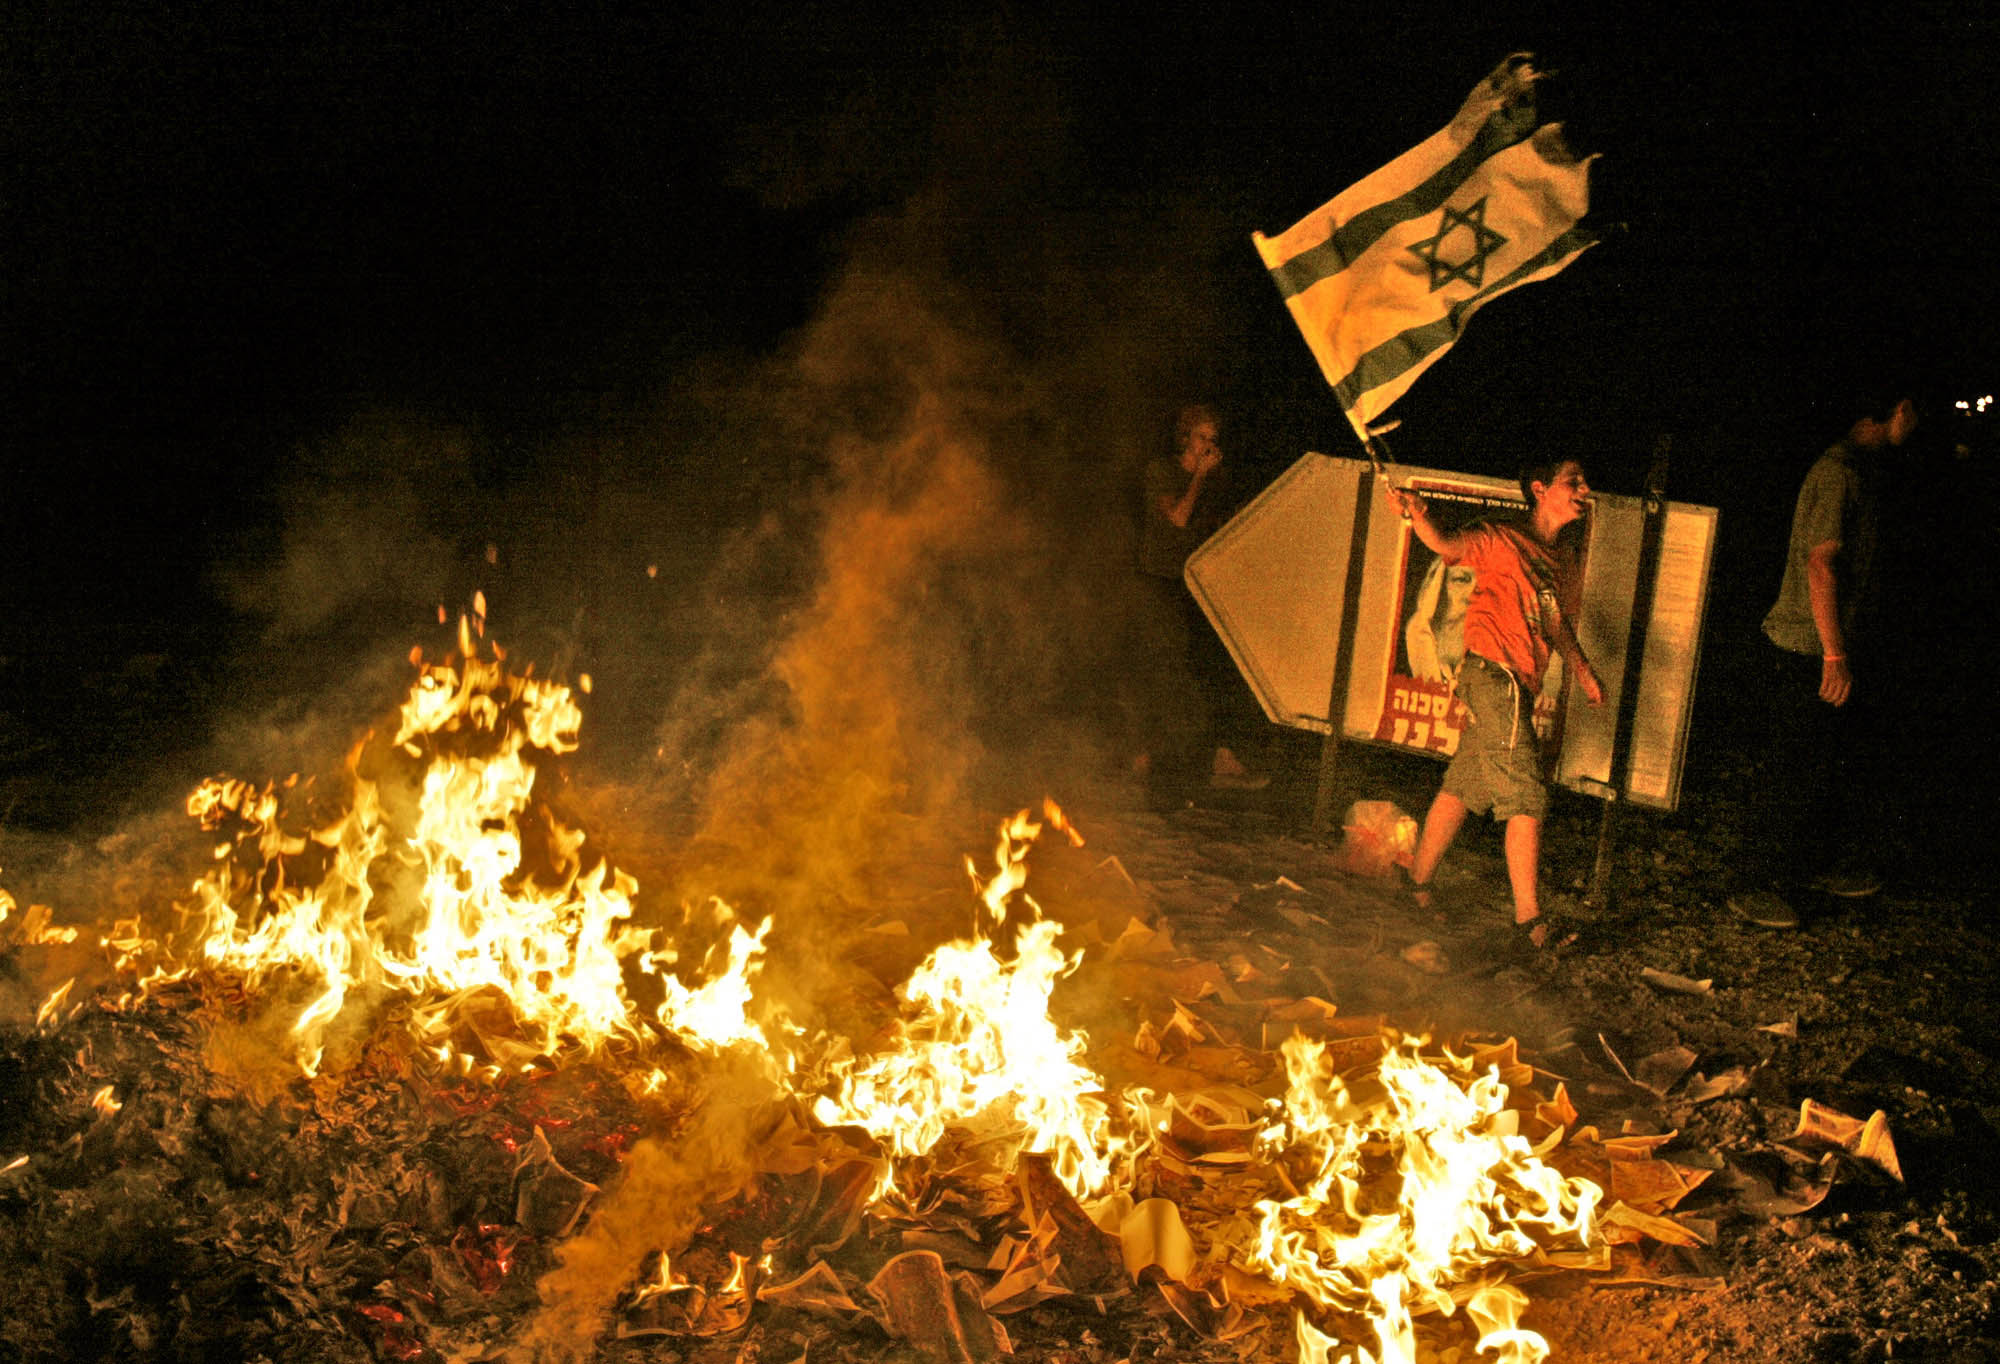 A Jewish protestor waves the Israeli flag next to a bonfire started by a mob who looted the back of a passing vehicle loaded with maps of the Gaza Strip in front of the Neve Dekalim settlement in the Gaza Strip on August 14, 2005.